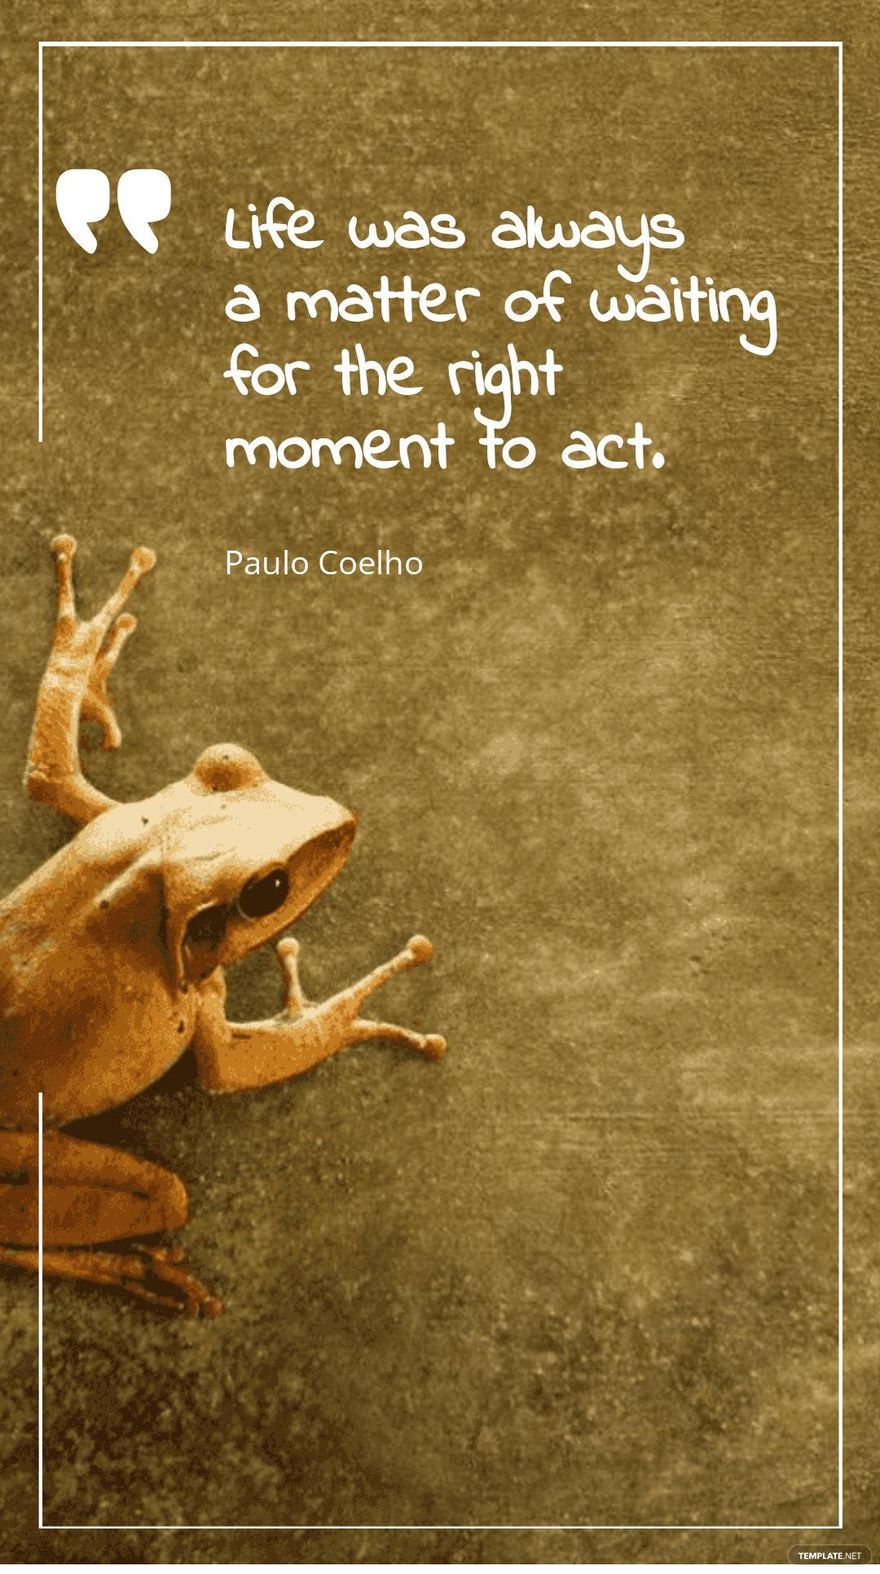 Paulo Coelho - Life was always a matter of waiting for the right moment to act.